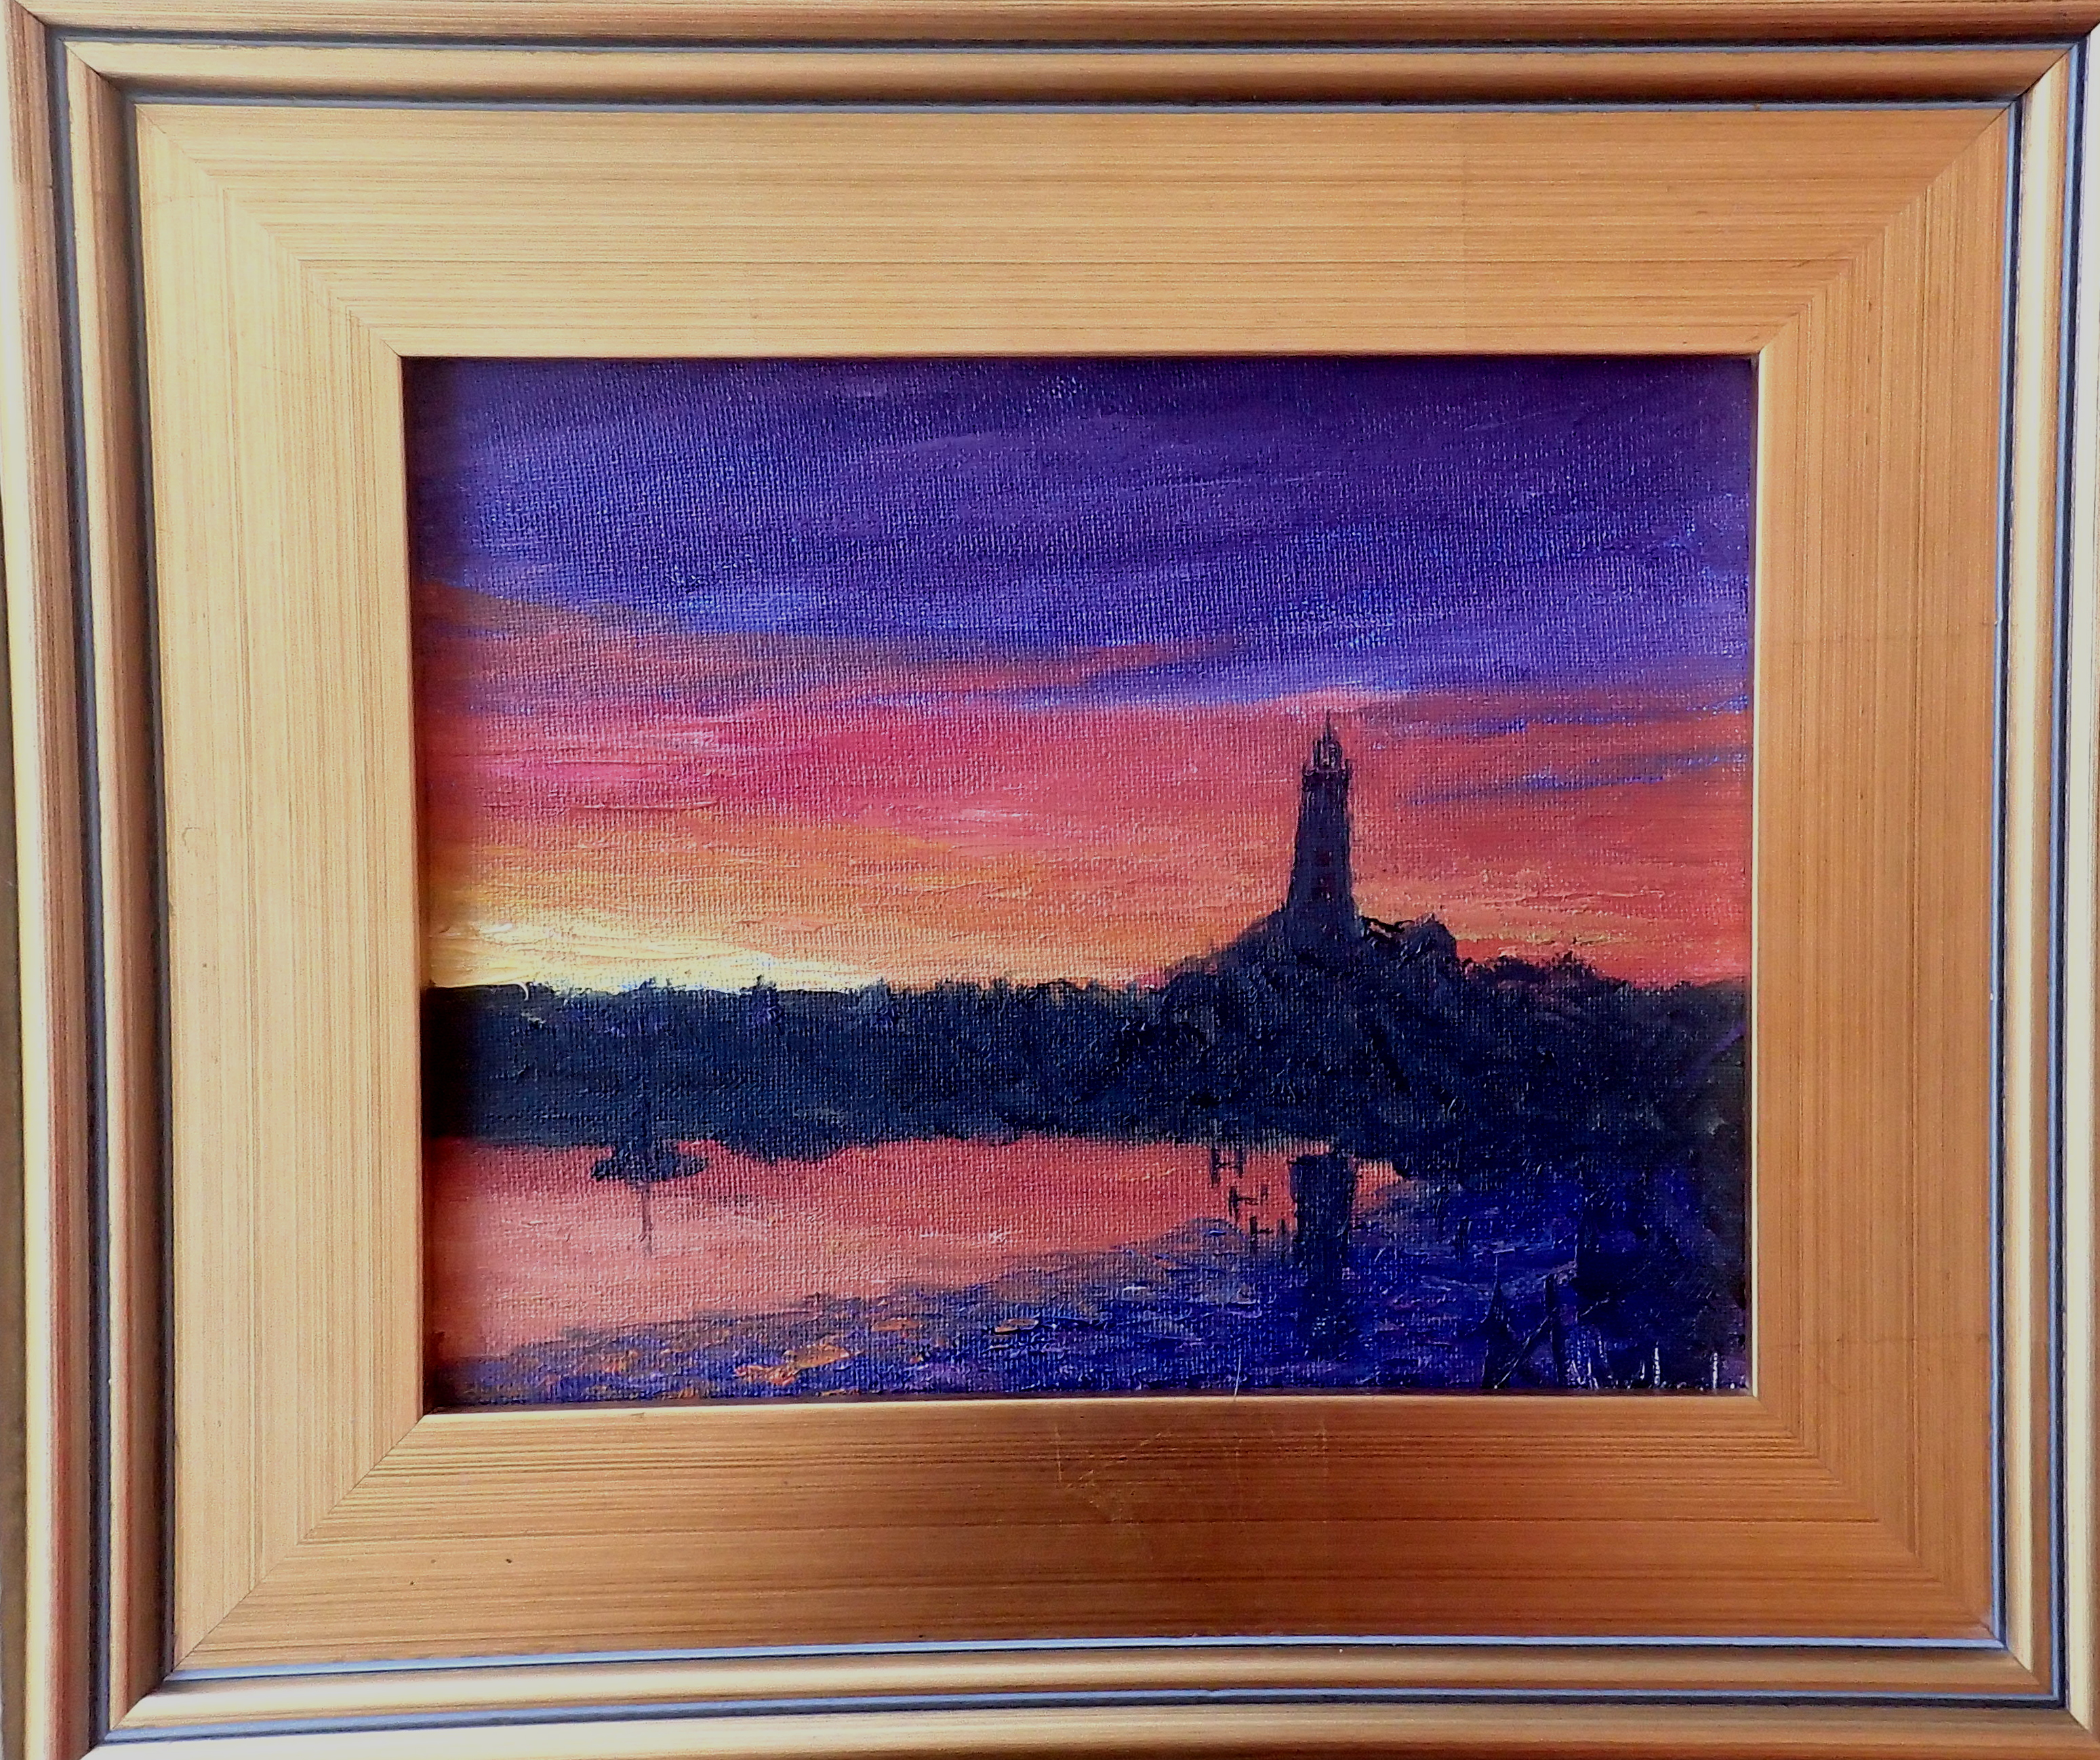 © Marlee Mason 8x10 Original Oil Painting on Canvas   This is a painting of Hope Town Harbour from photograph as darkness looms on a village with the only source of light the sunlight.  Sunset arrive